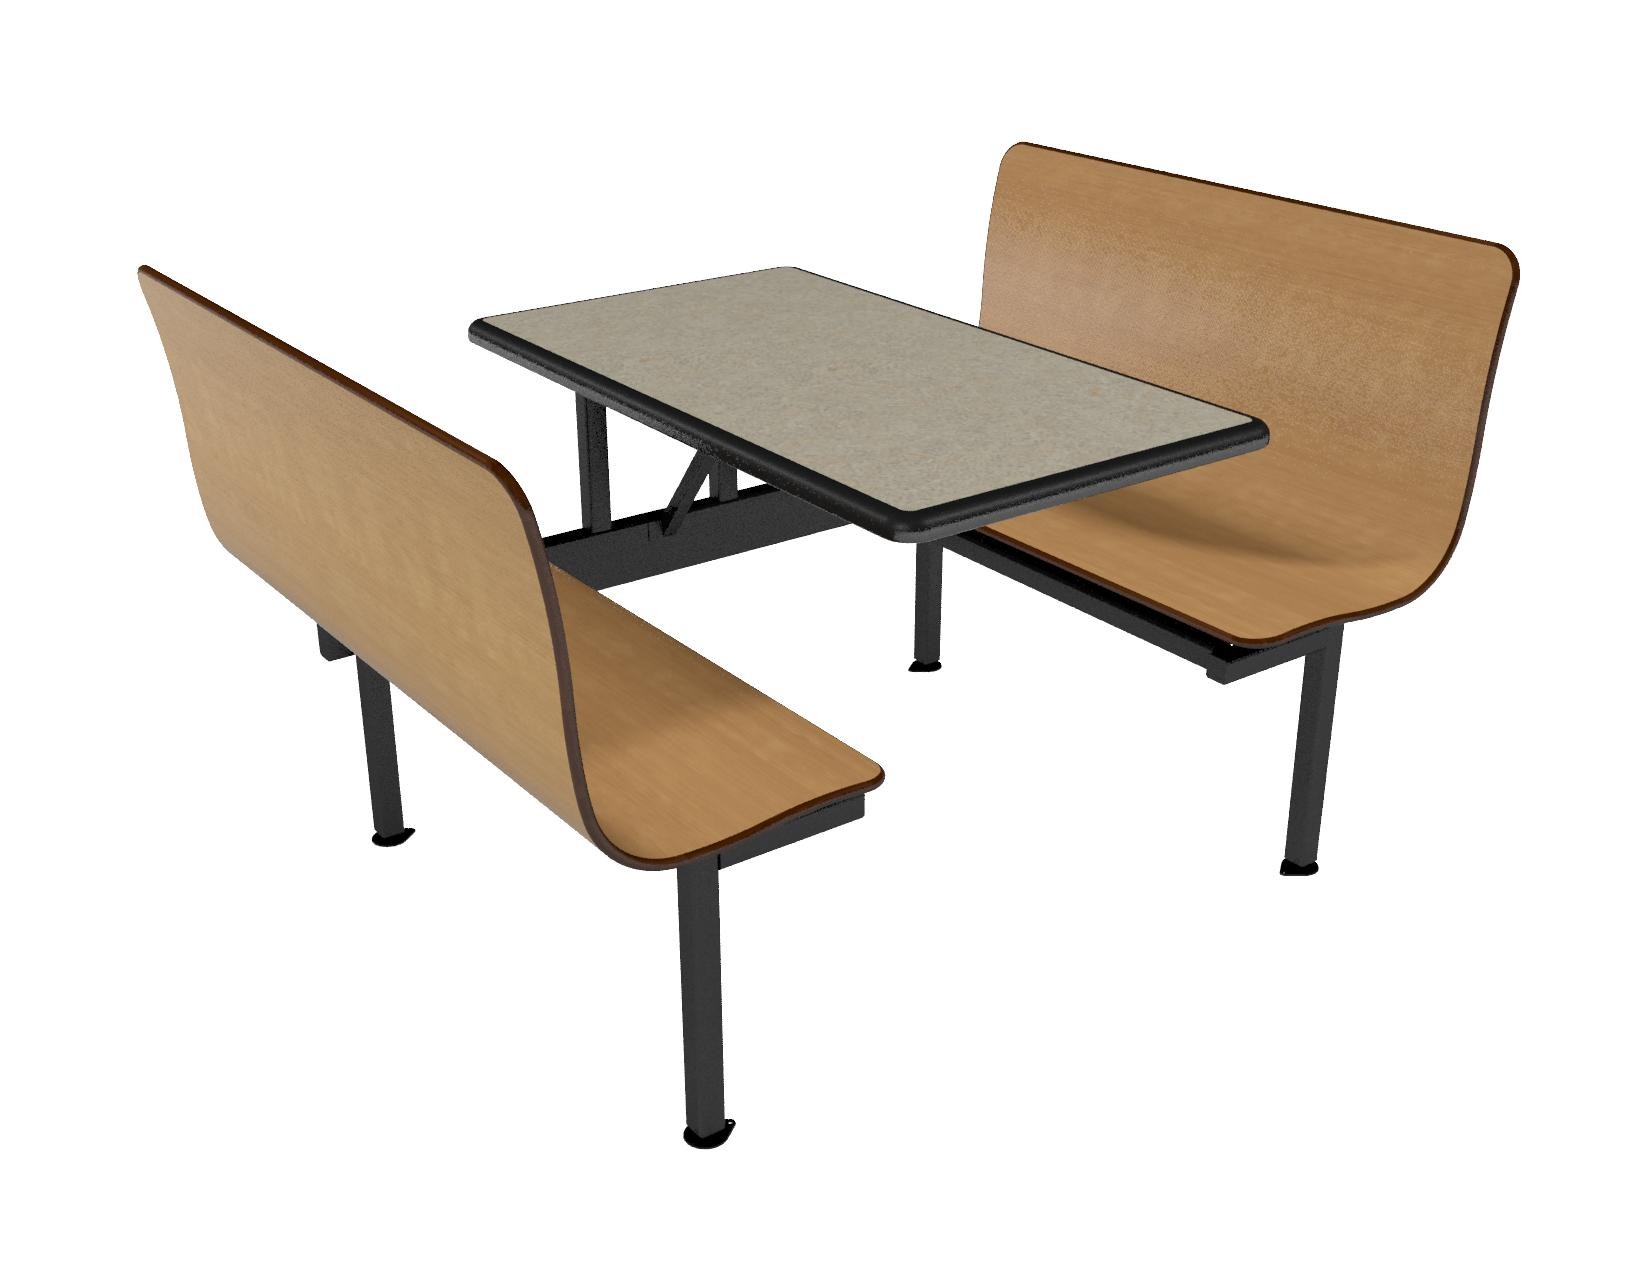 Monticello Maple benches, Bronze Legacy table top with Black Dur-A-Edge®